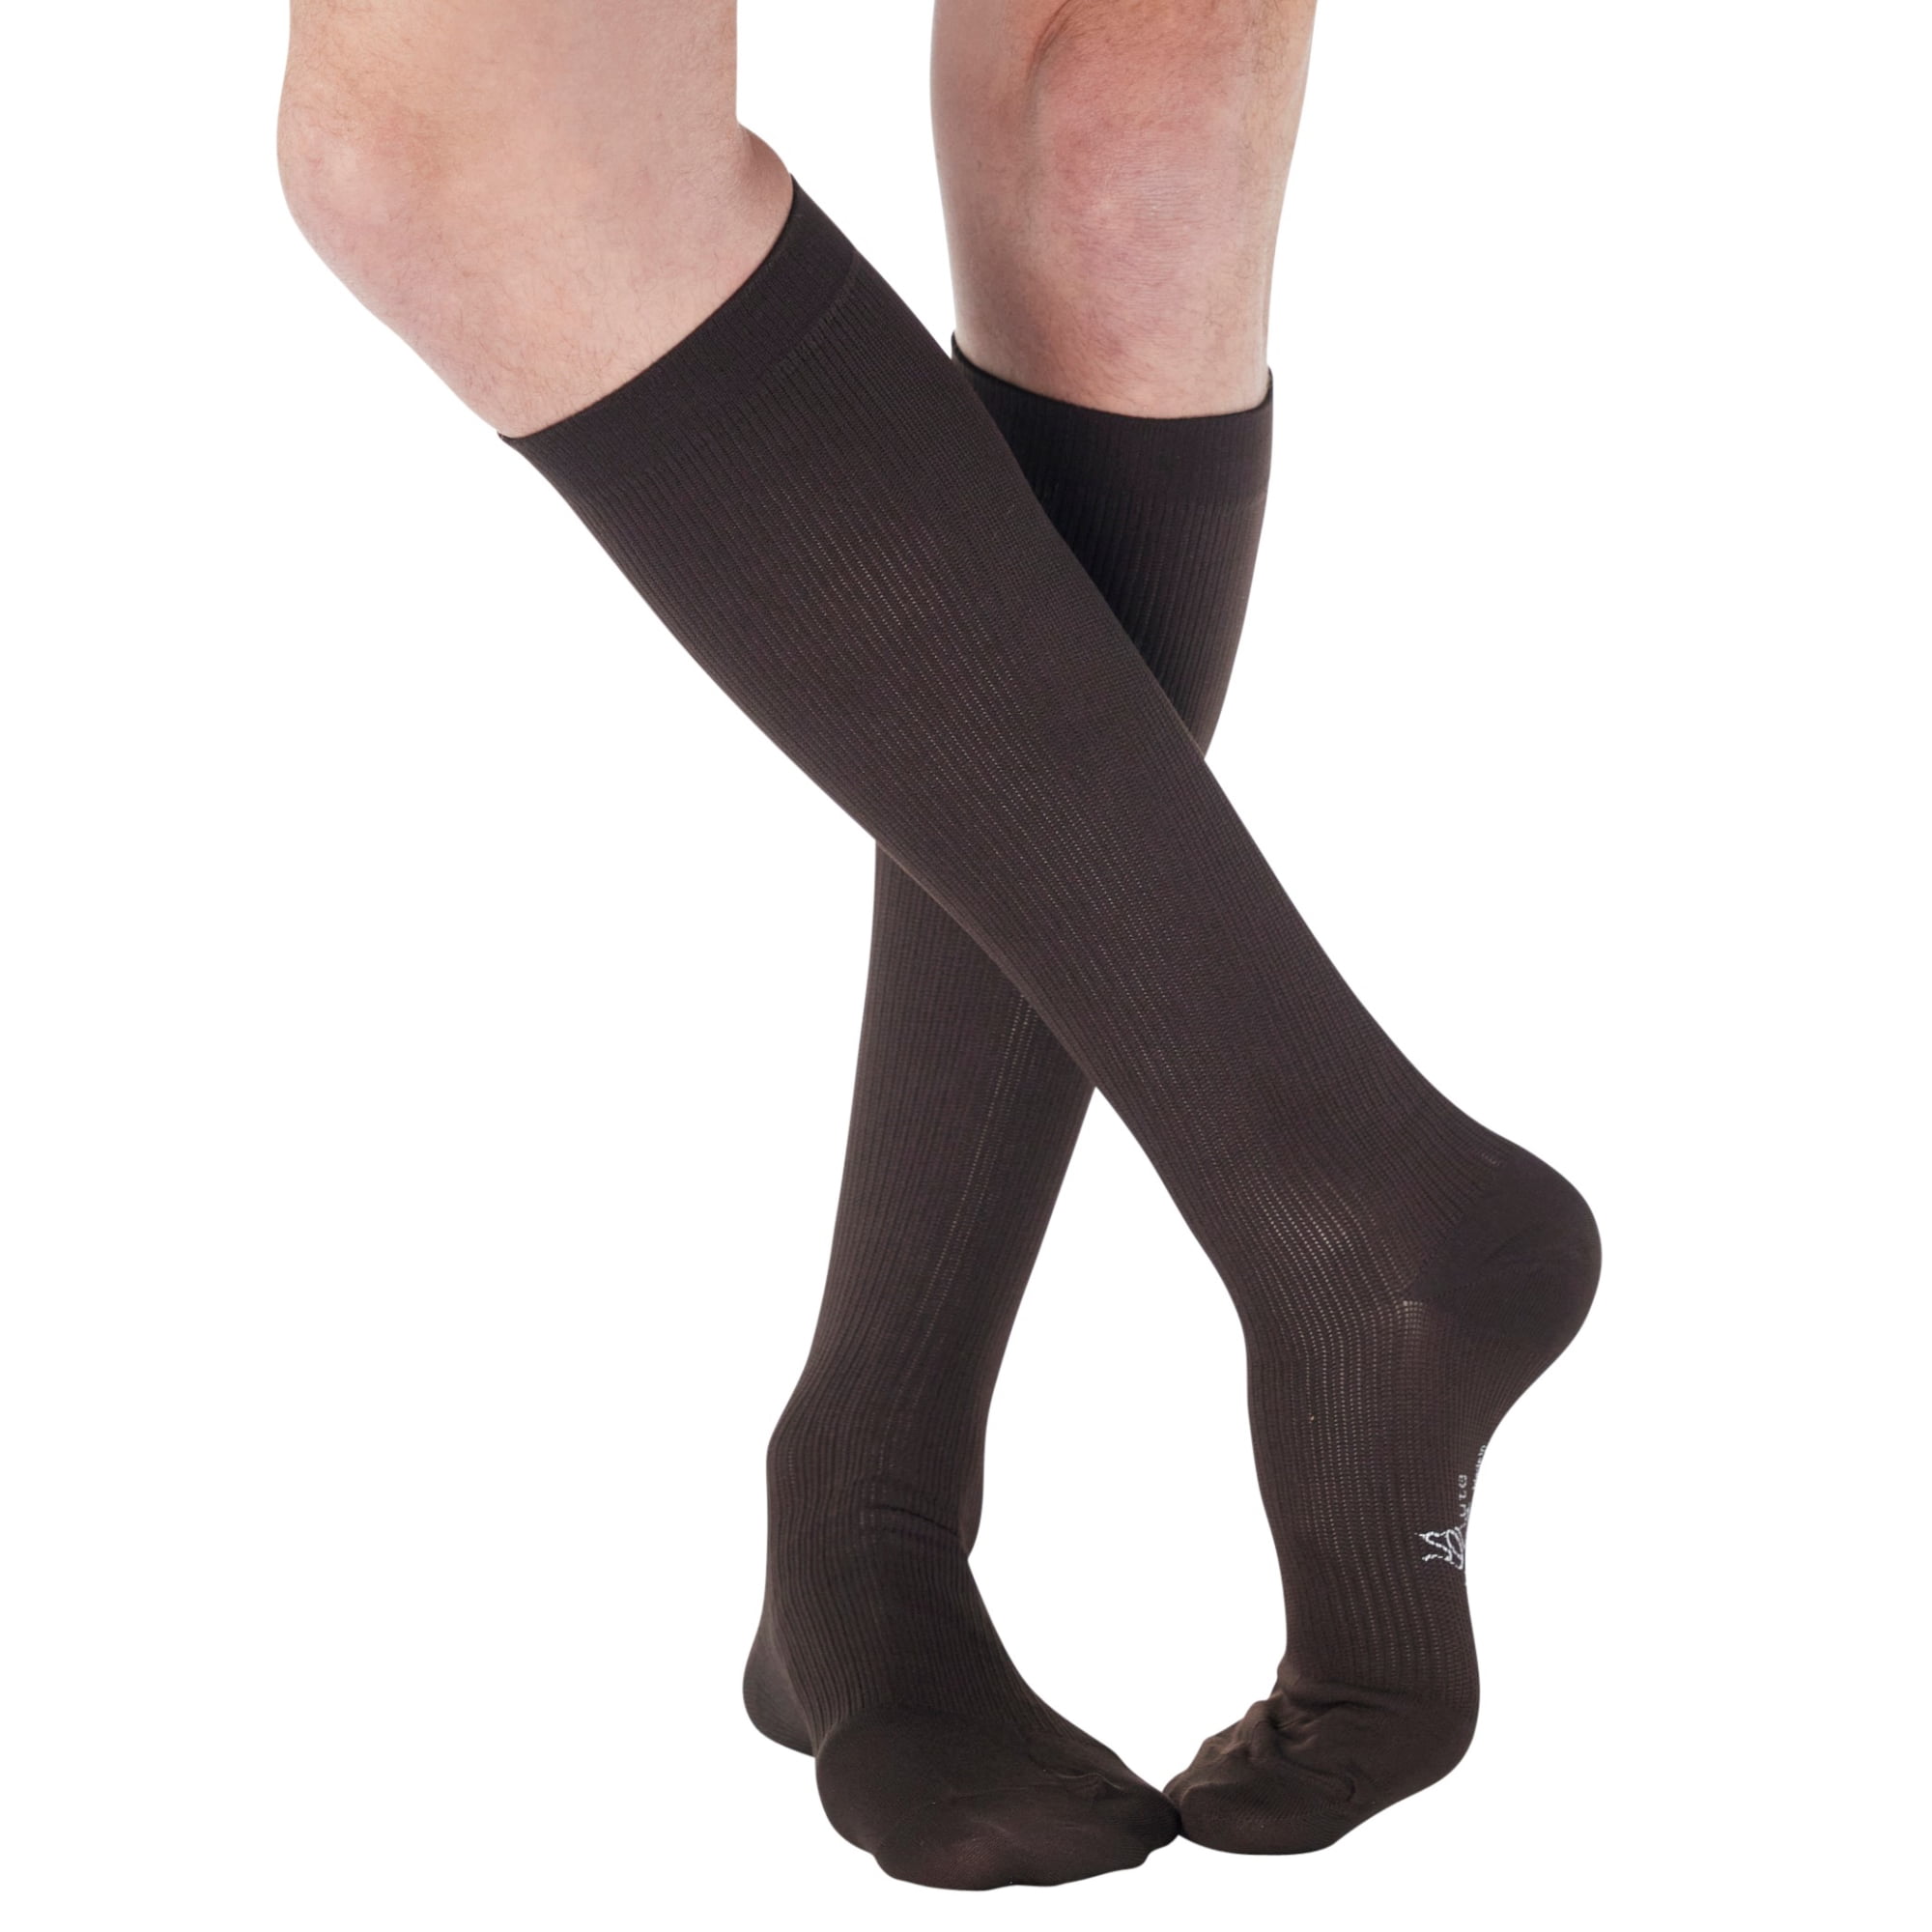 Made in USA - Circulating Dress Compression Socks 20-30 mmHg for Men ...